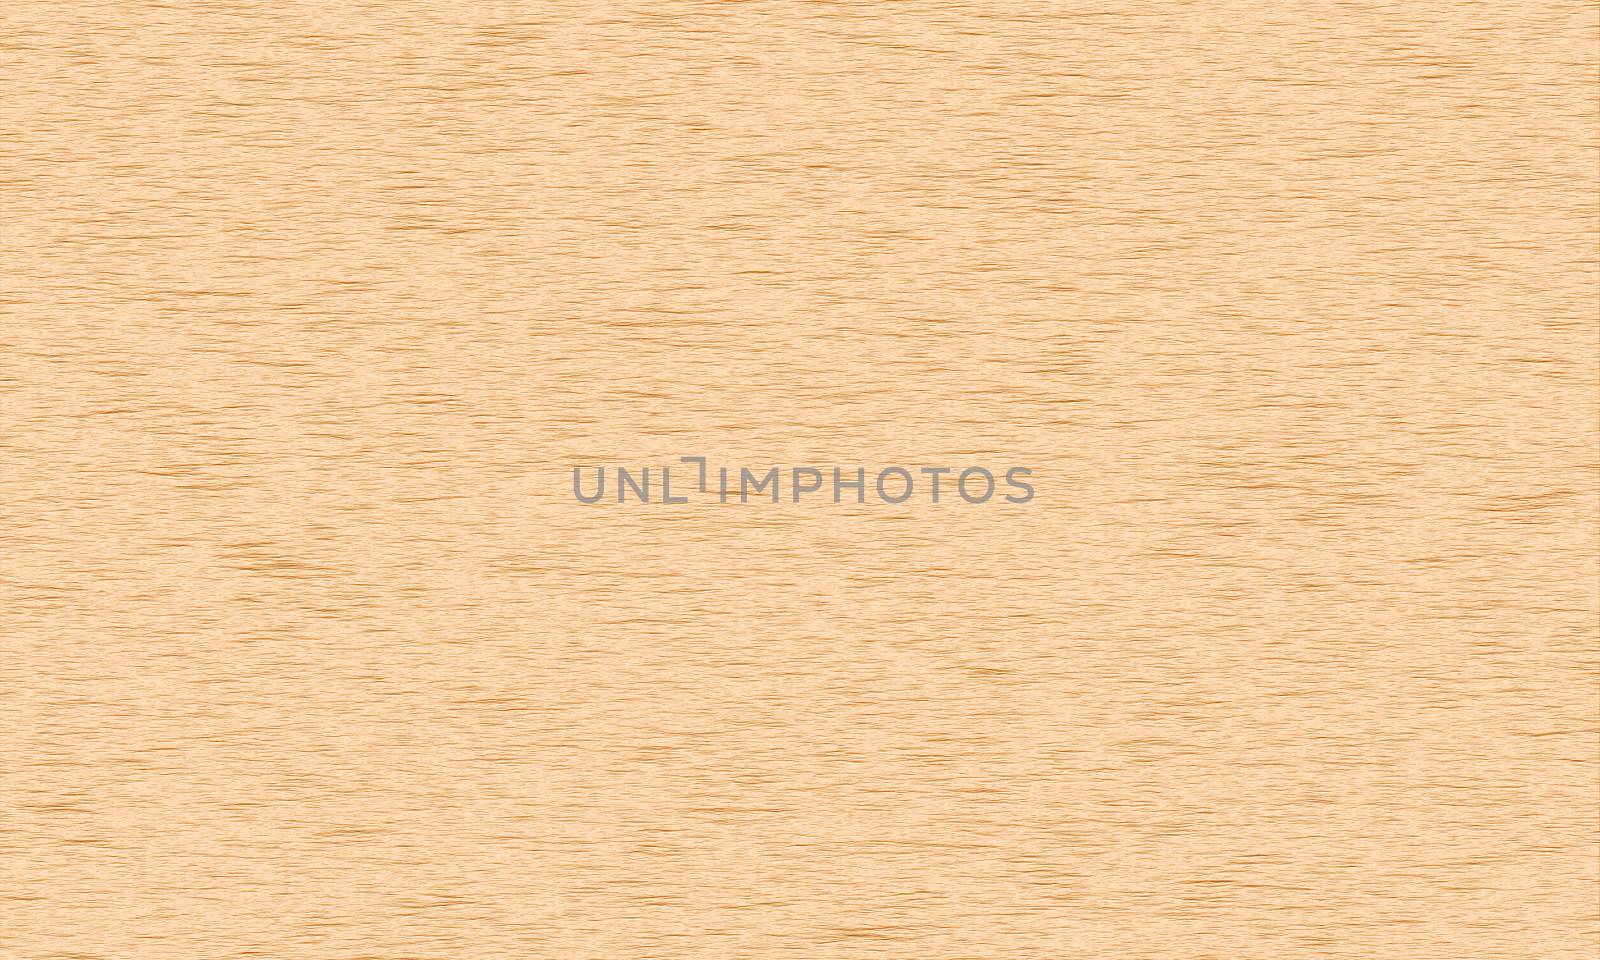 Wooden Texture made from photoshop program.